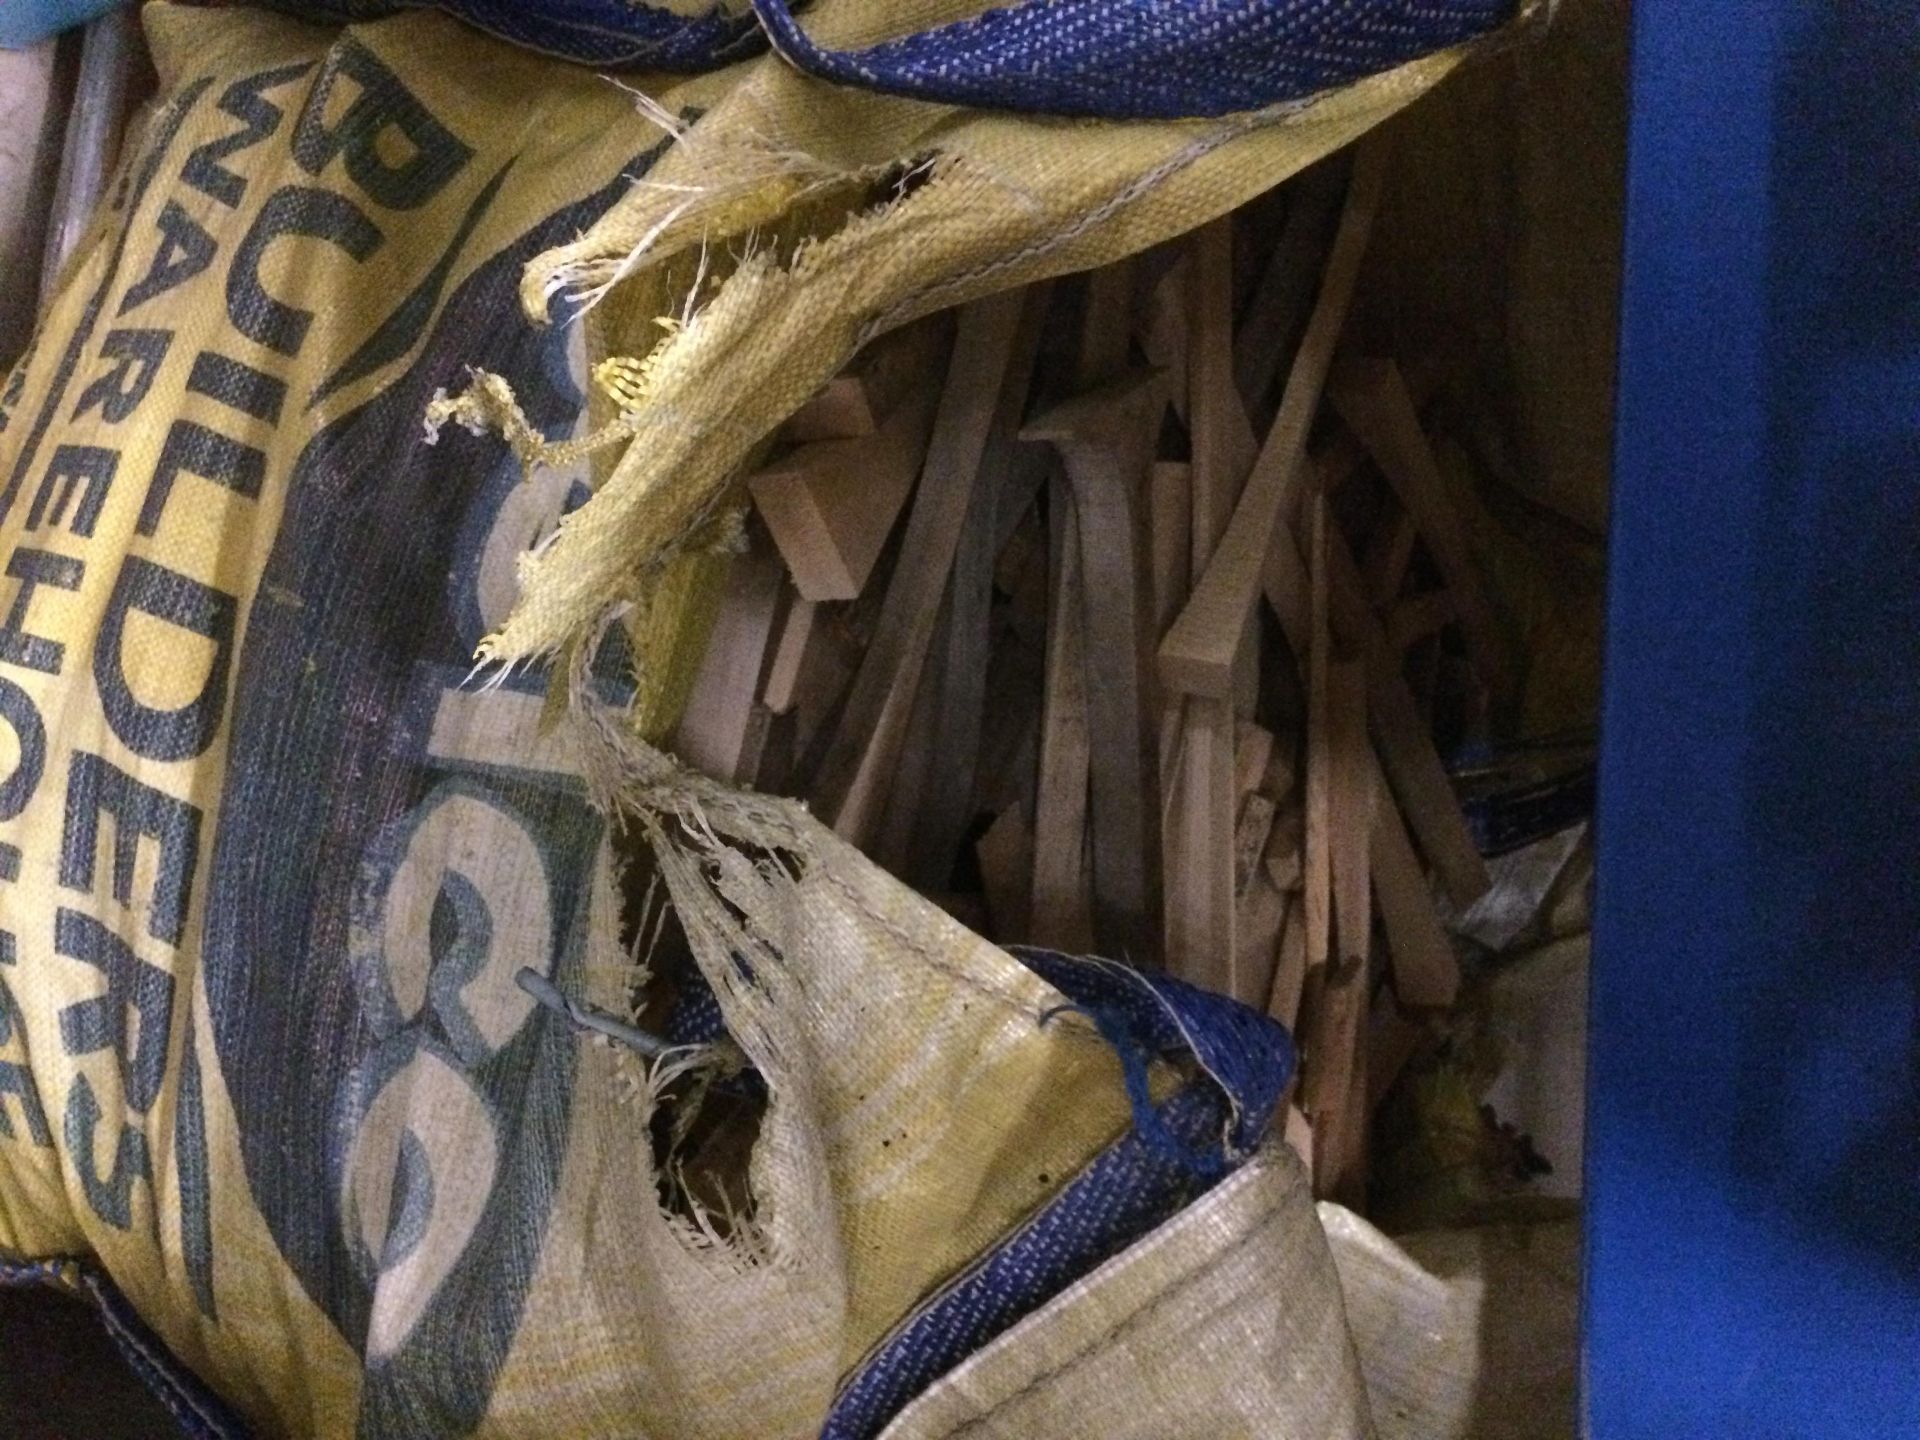 Contents to builders sack - off cut kindling